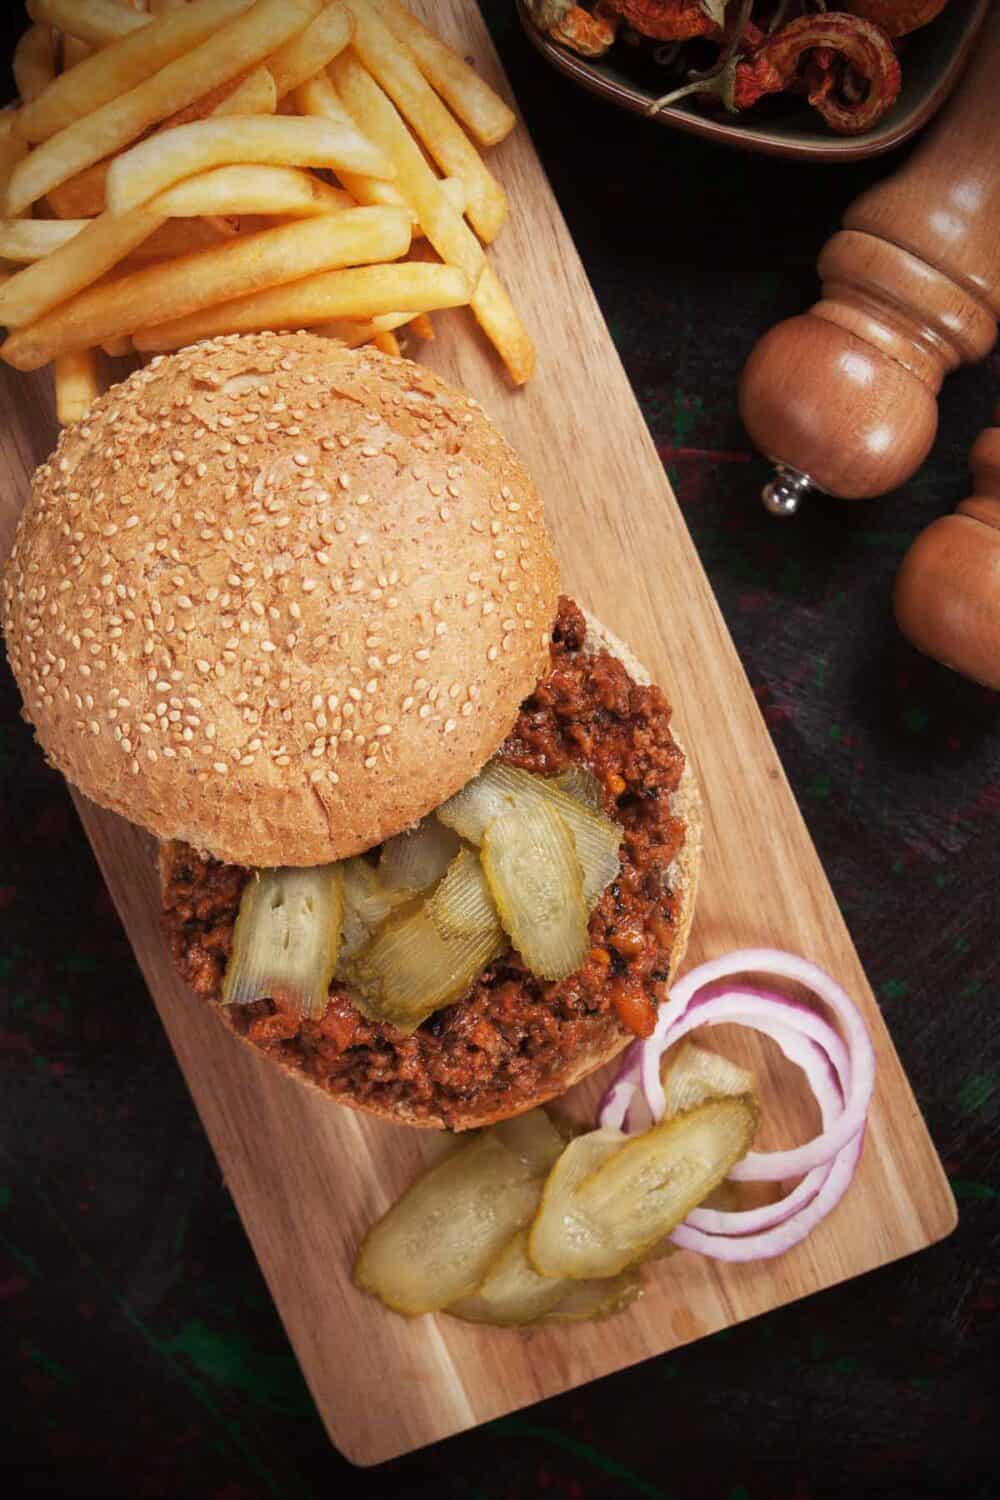 Sloppy joes sandwich with pickles, red onion, and French fries.